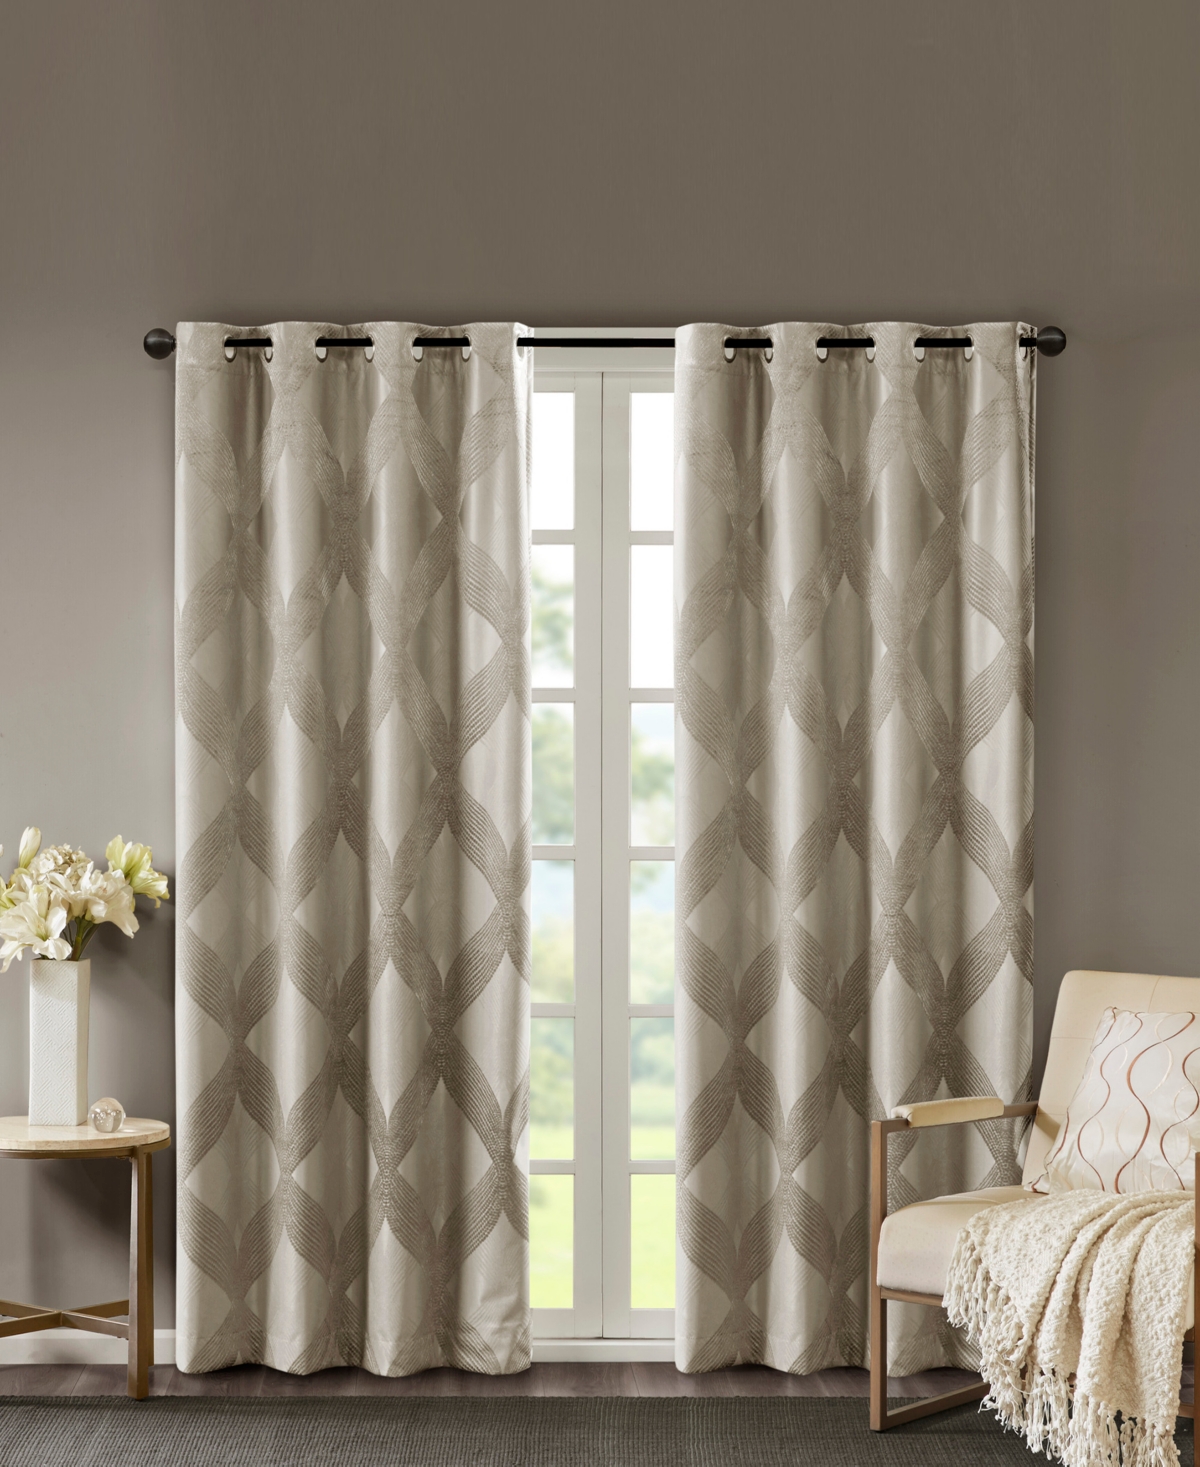 Bentley Ogee Knitted Jacquard Total Blackout Curtain Panel, 50"W x 95"L - Taupe